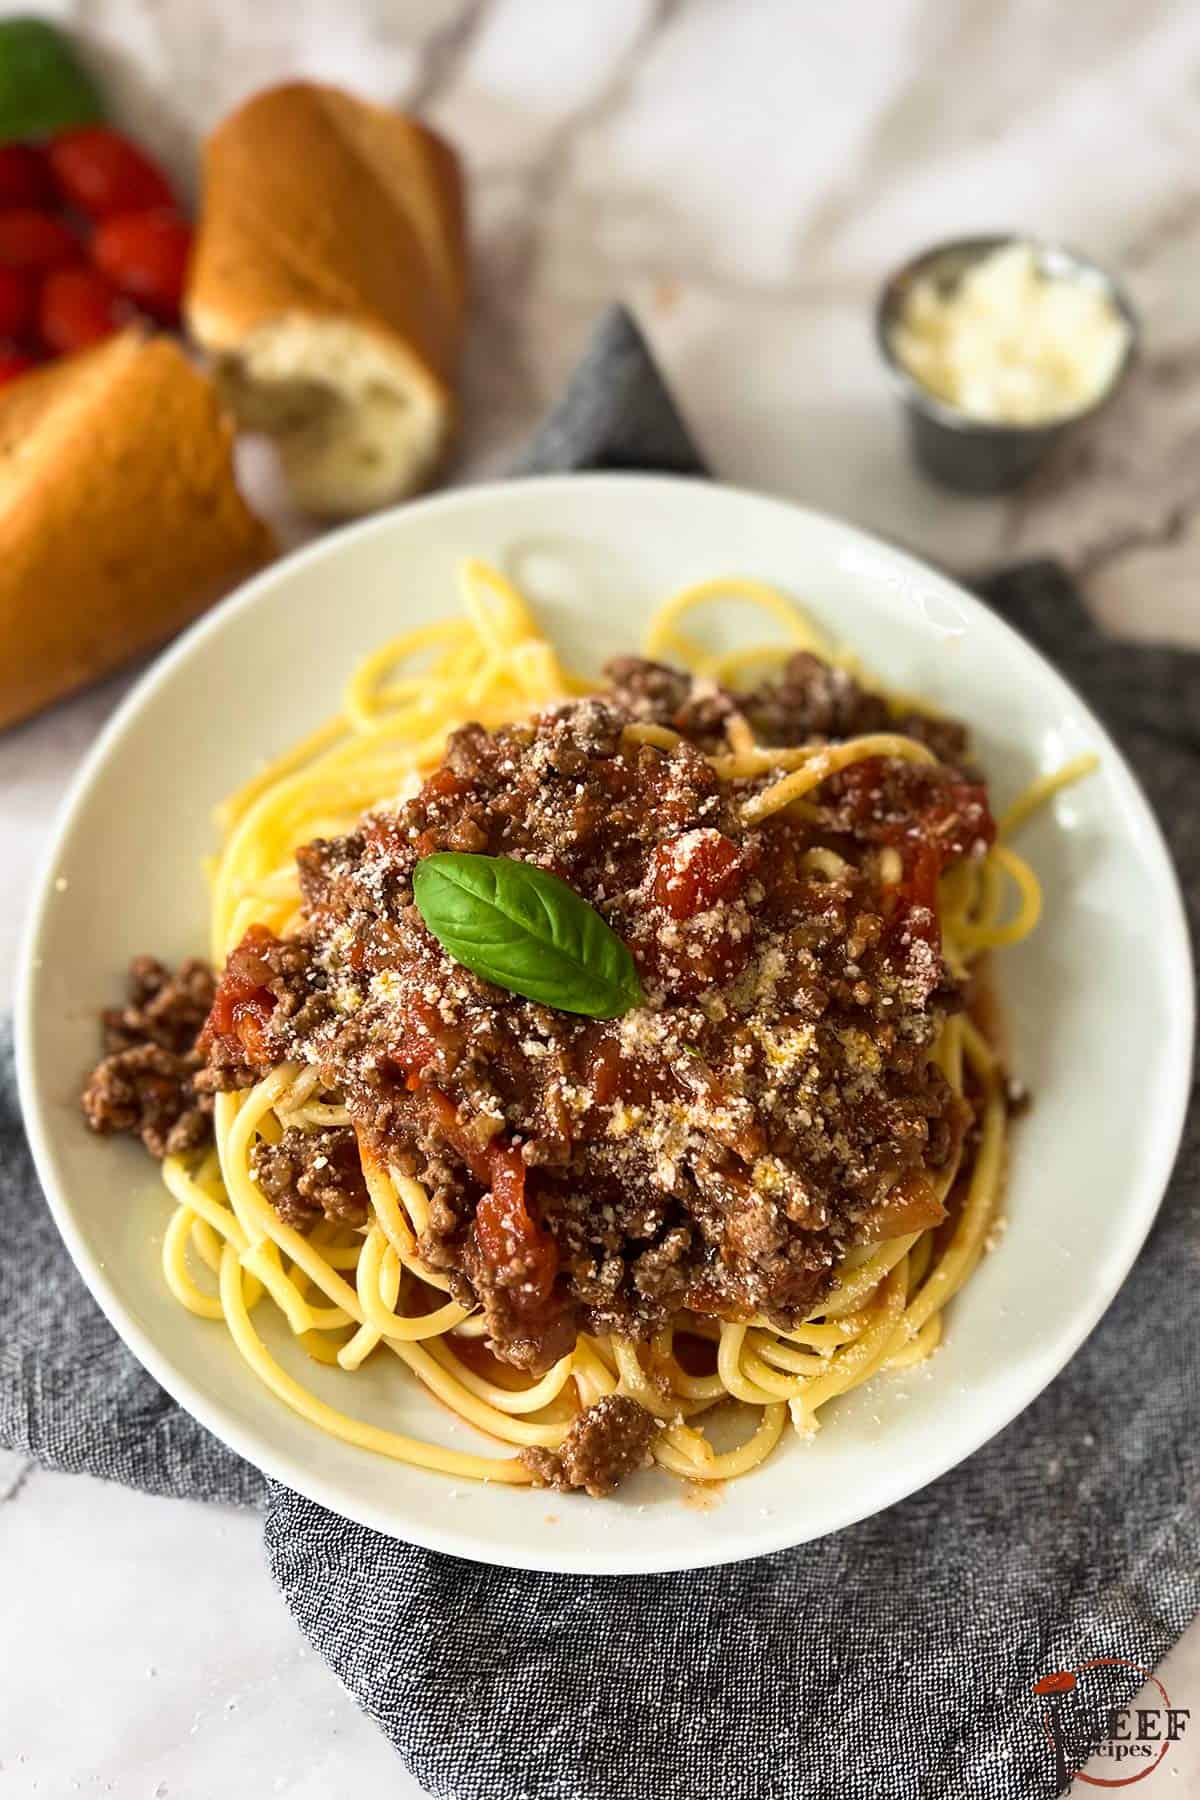 sugo di carne and spaghetti on a plate with a bread roll in the background